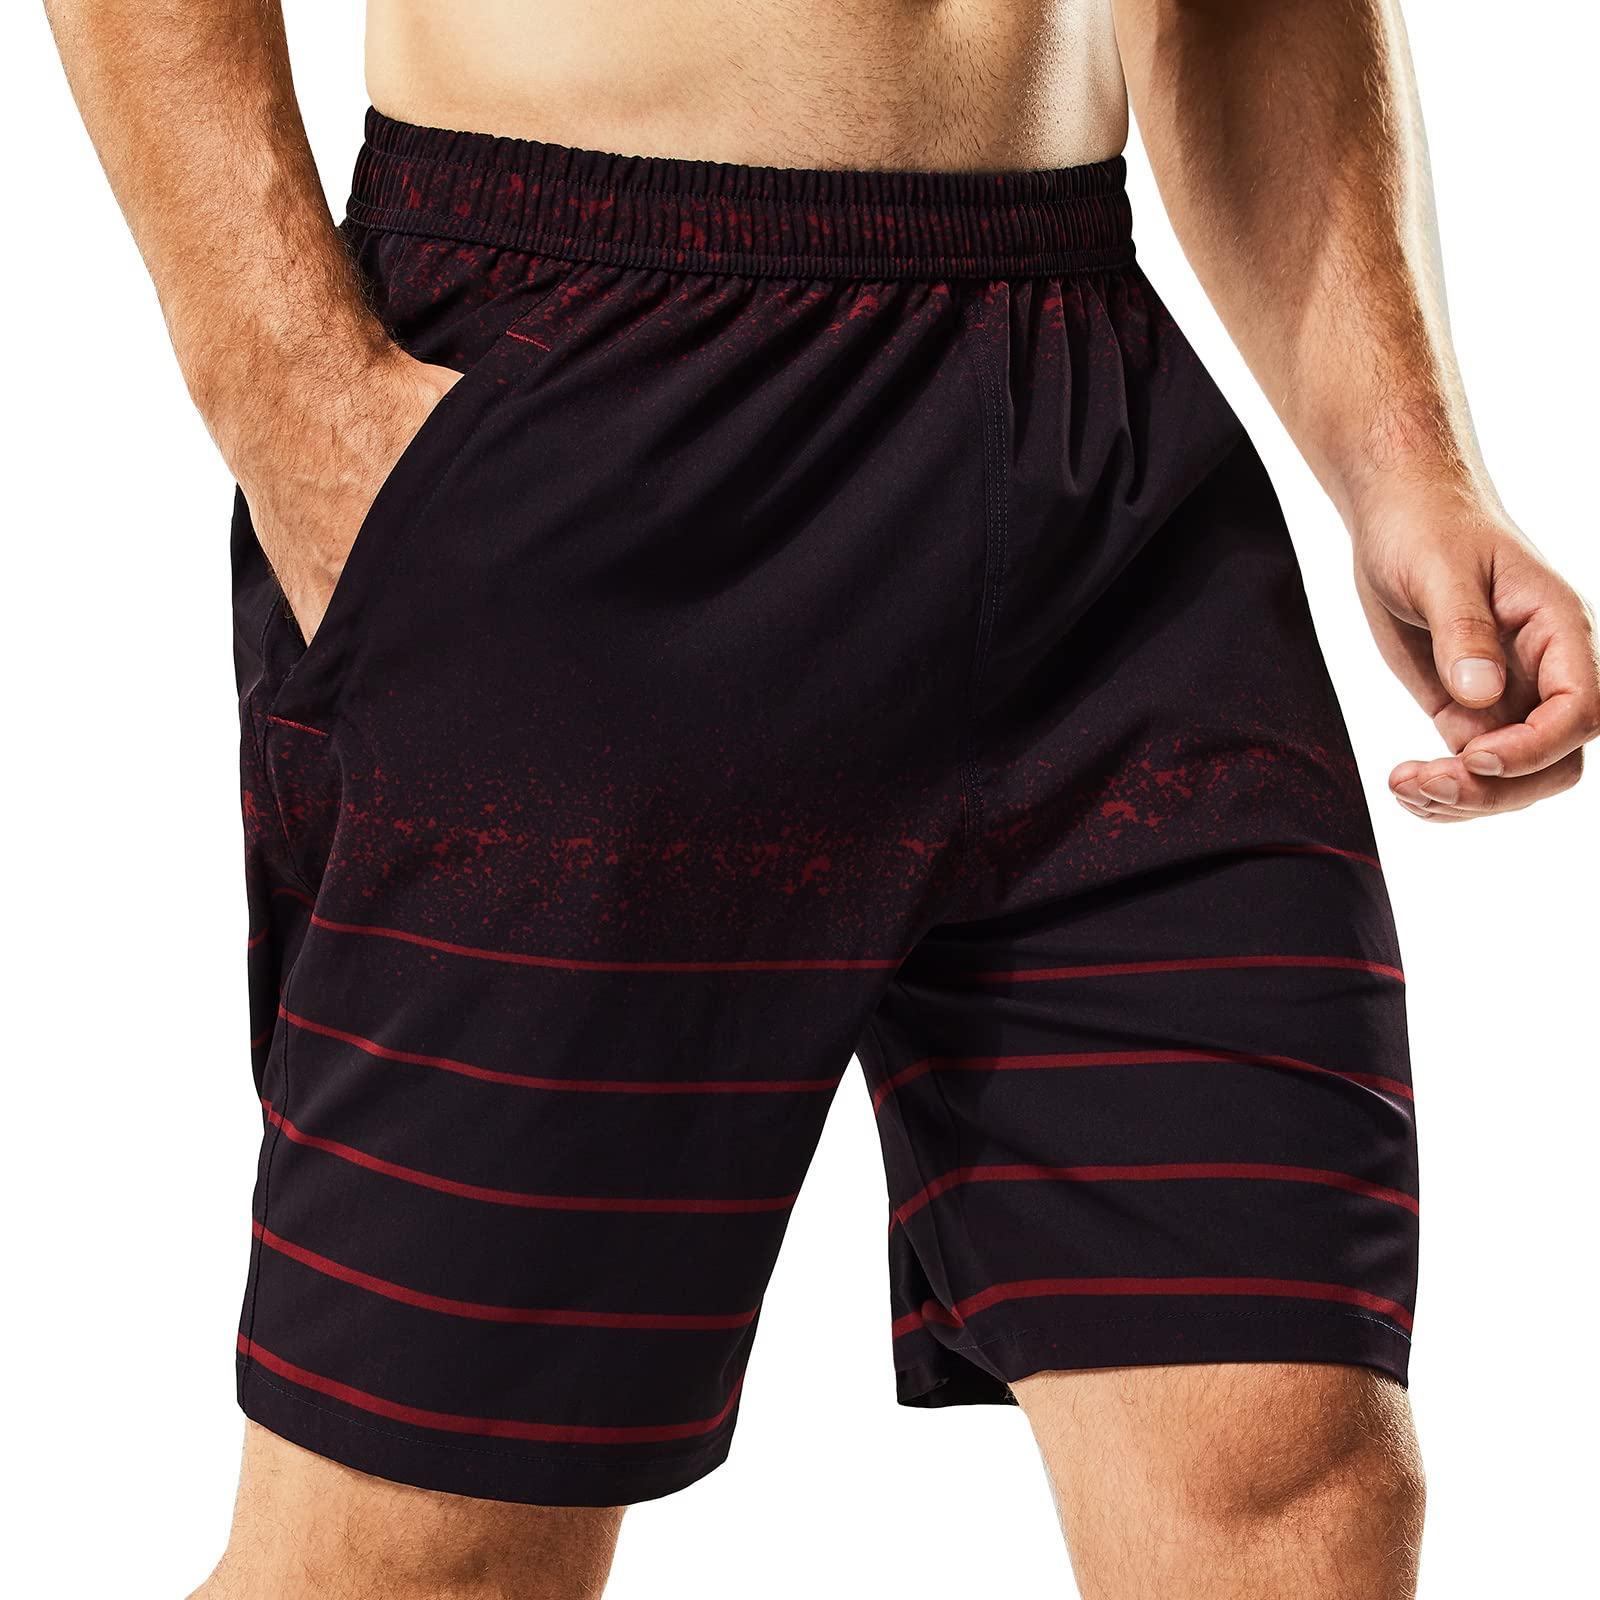 Men's Dry Fit Athletic Gym Shorts with Zipper Pockets 7 inch Men's Shorts Print Burgundy / S MIER